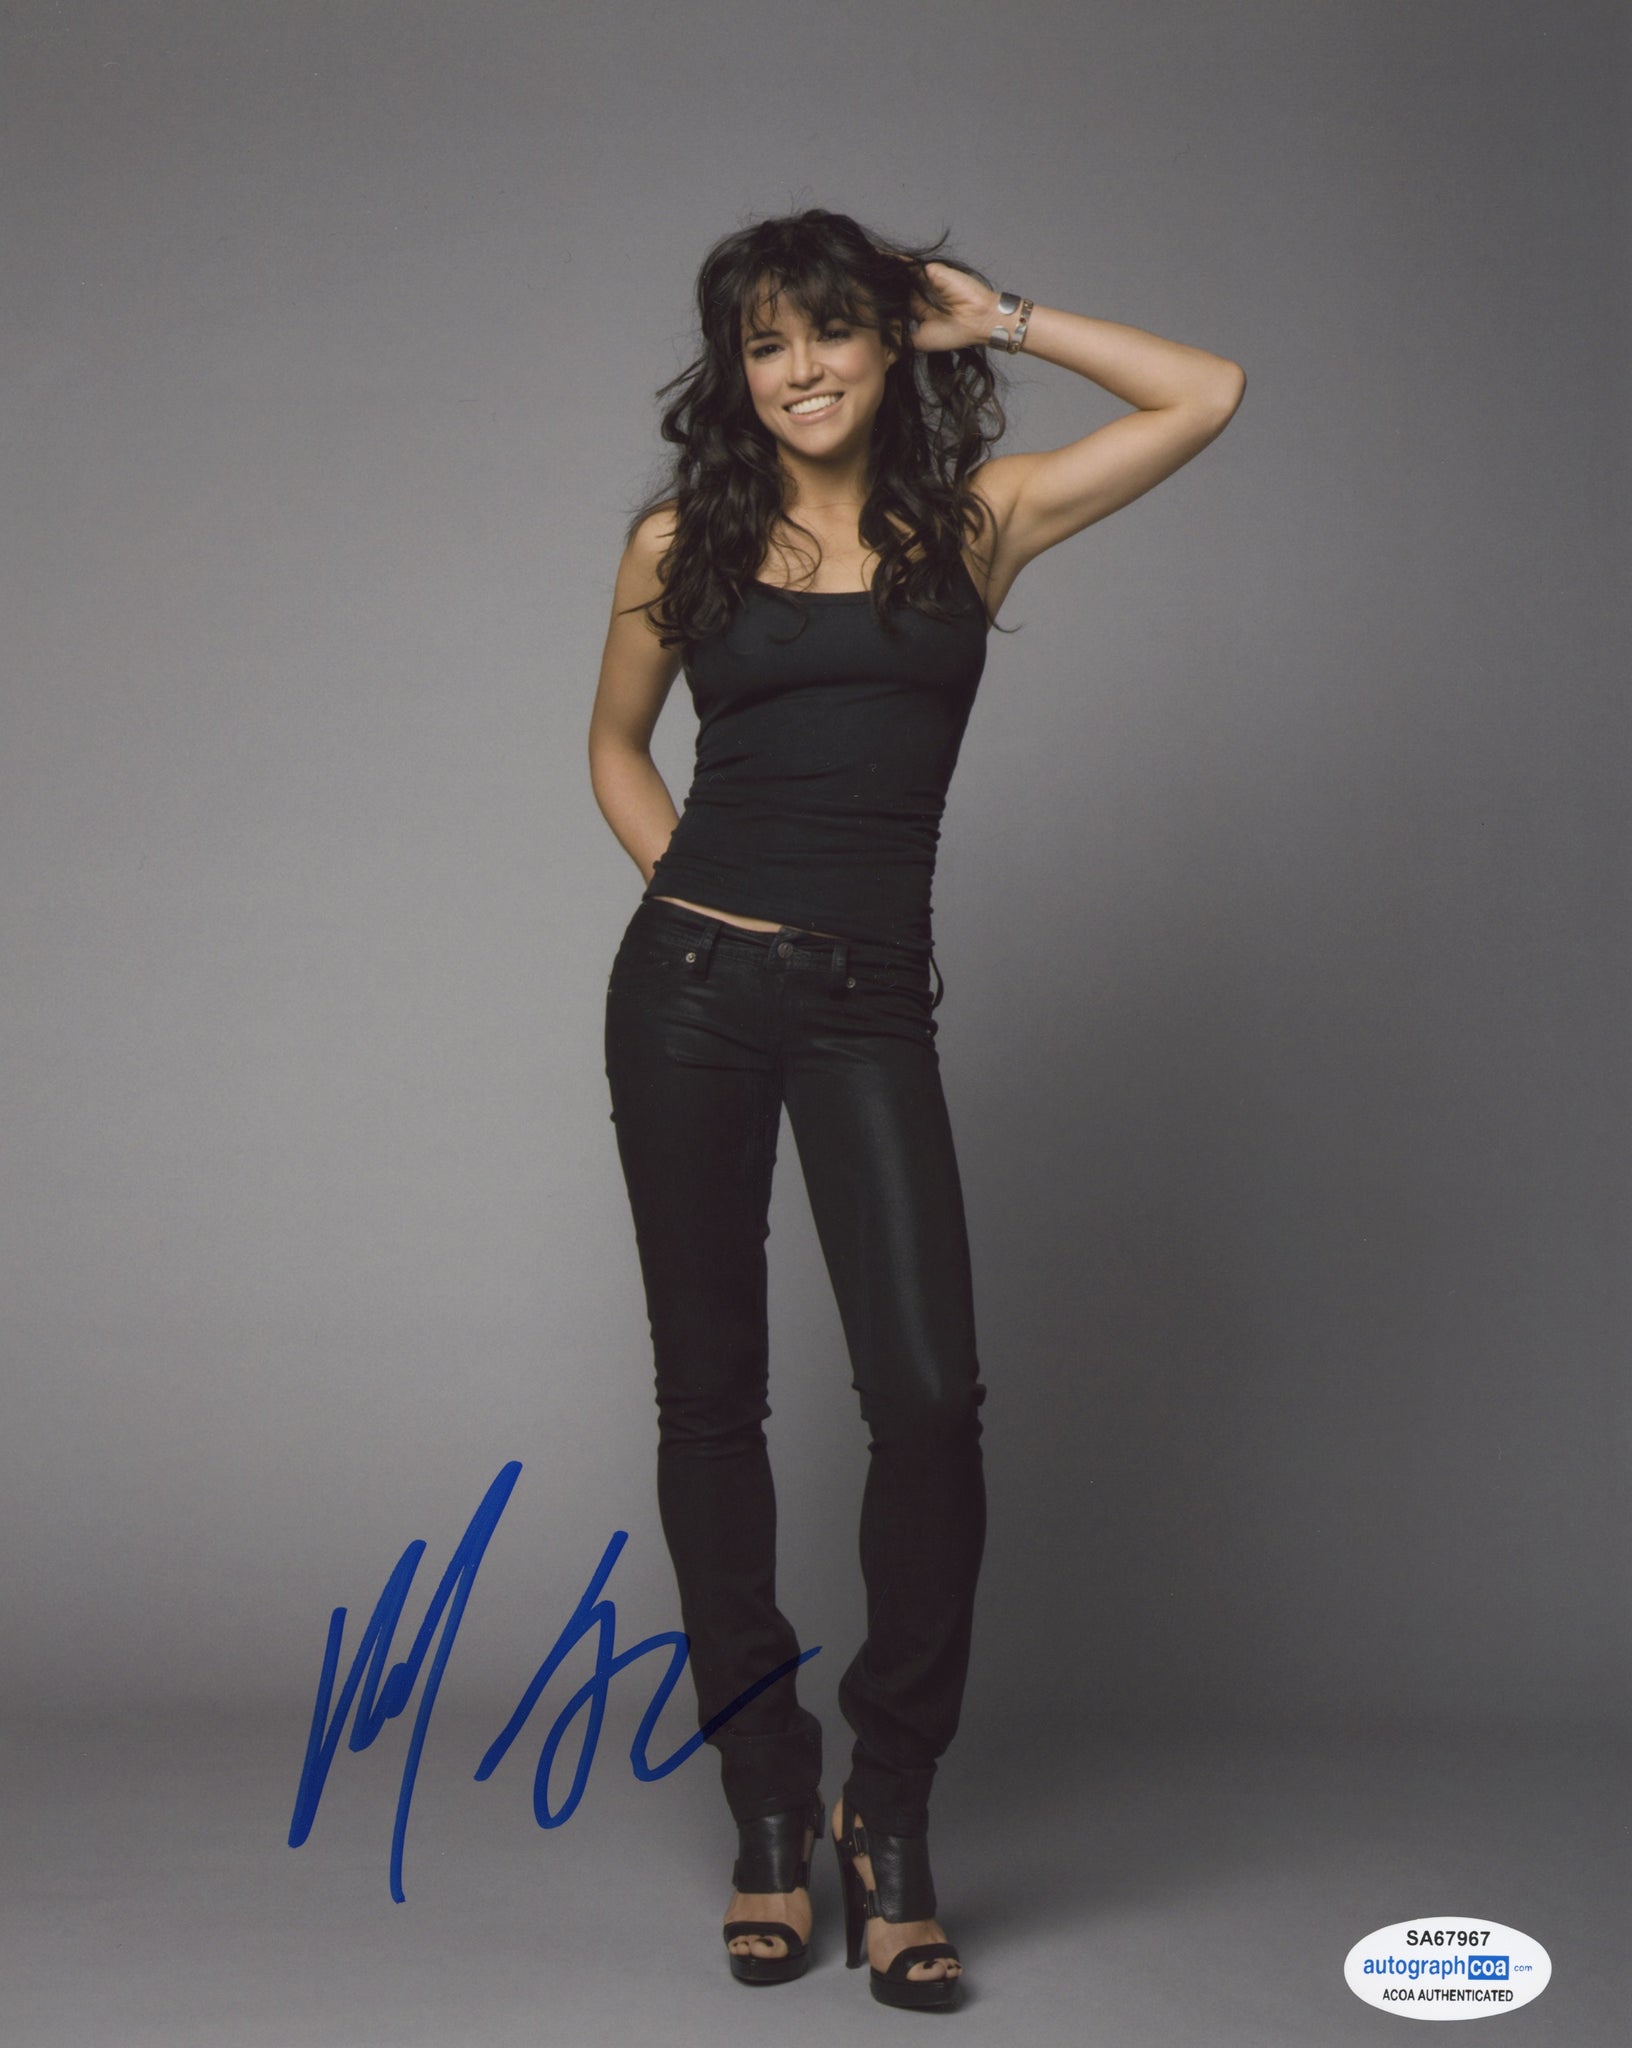 Michelle Rodriguez Fast and Furious Signed Autograph 8x10 Photo ACOA